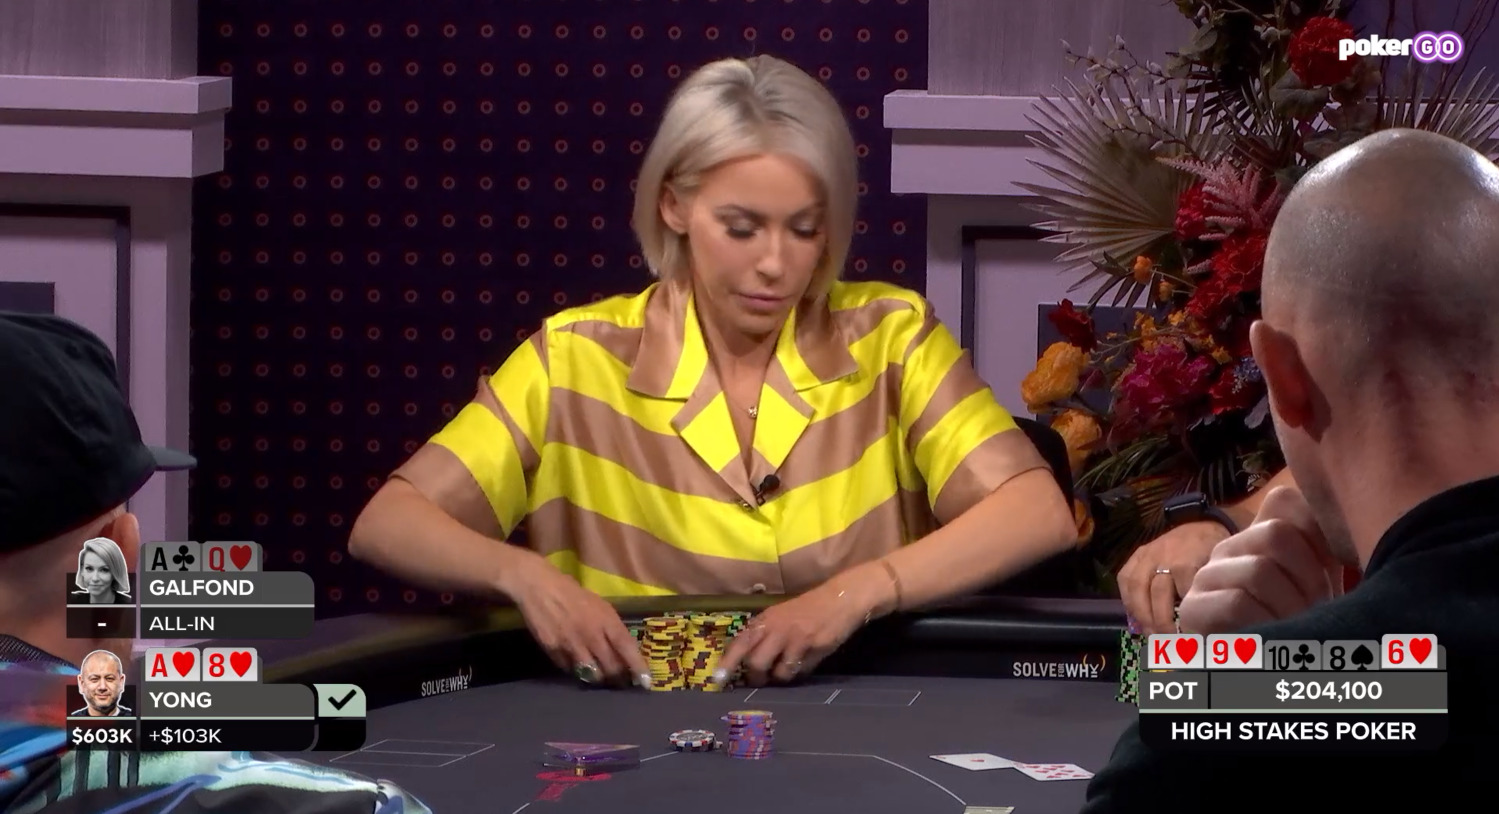 Farah Galfond Gets Felted Twice At Her High Stakes Poker Debut (2)